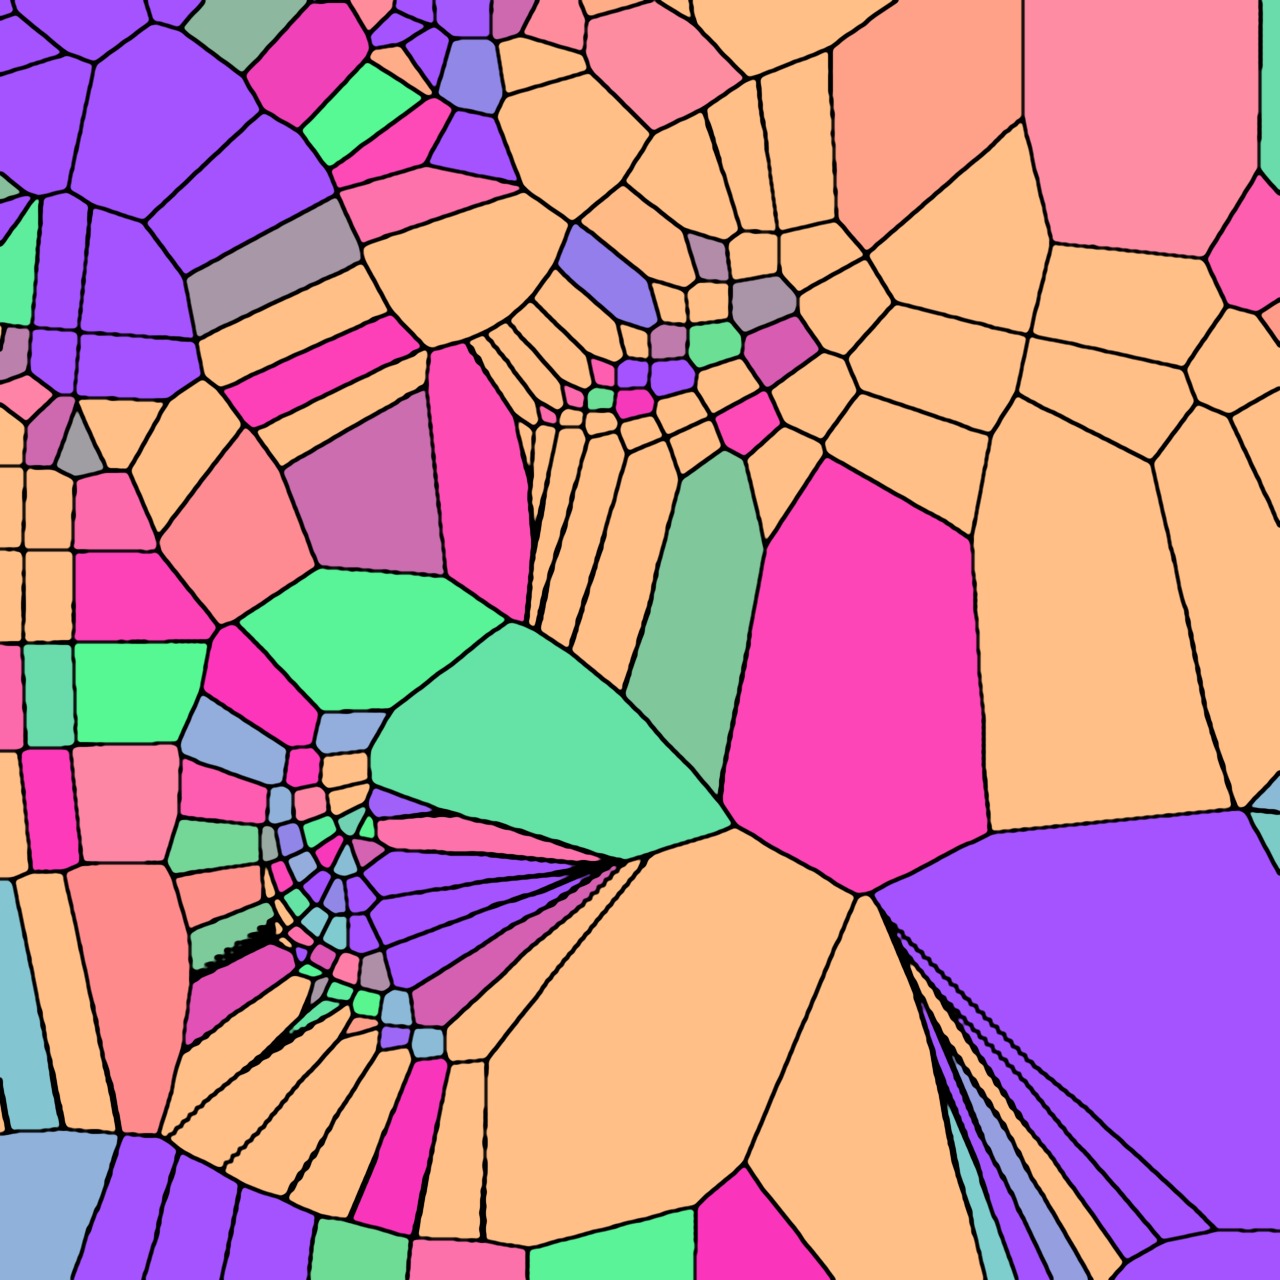 Voronoi pattern produced by Code 01